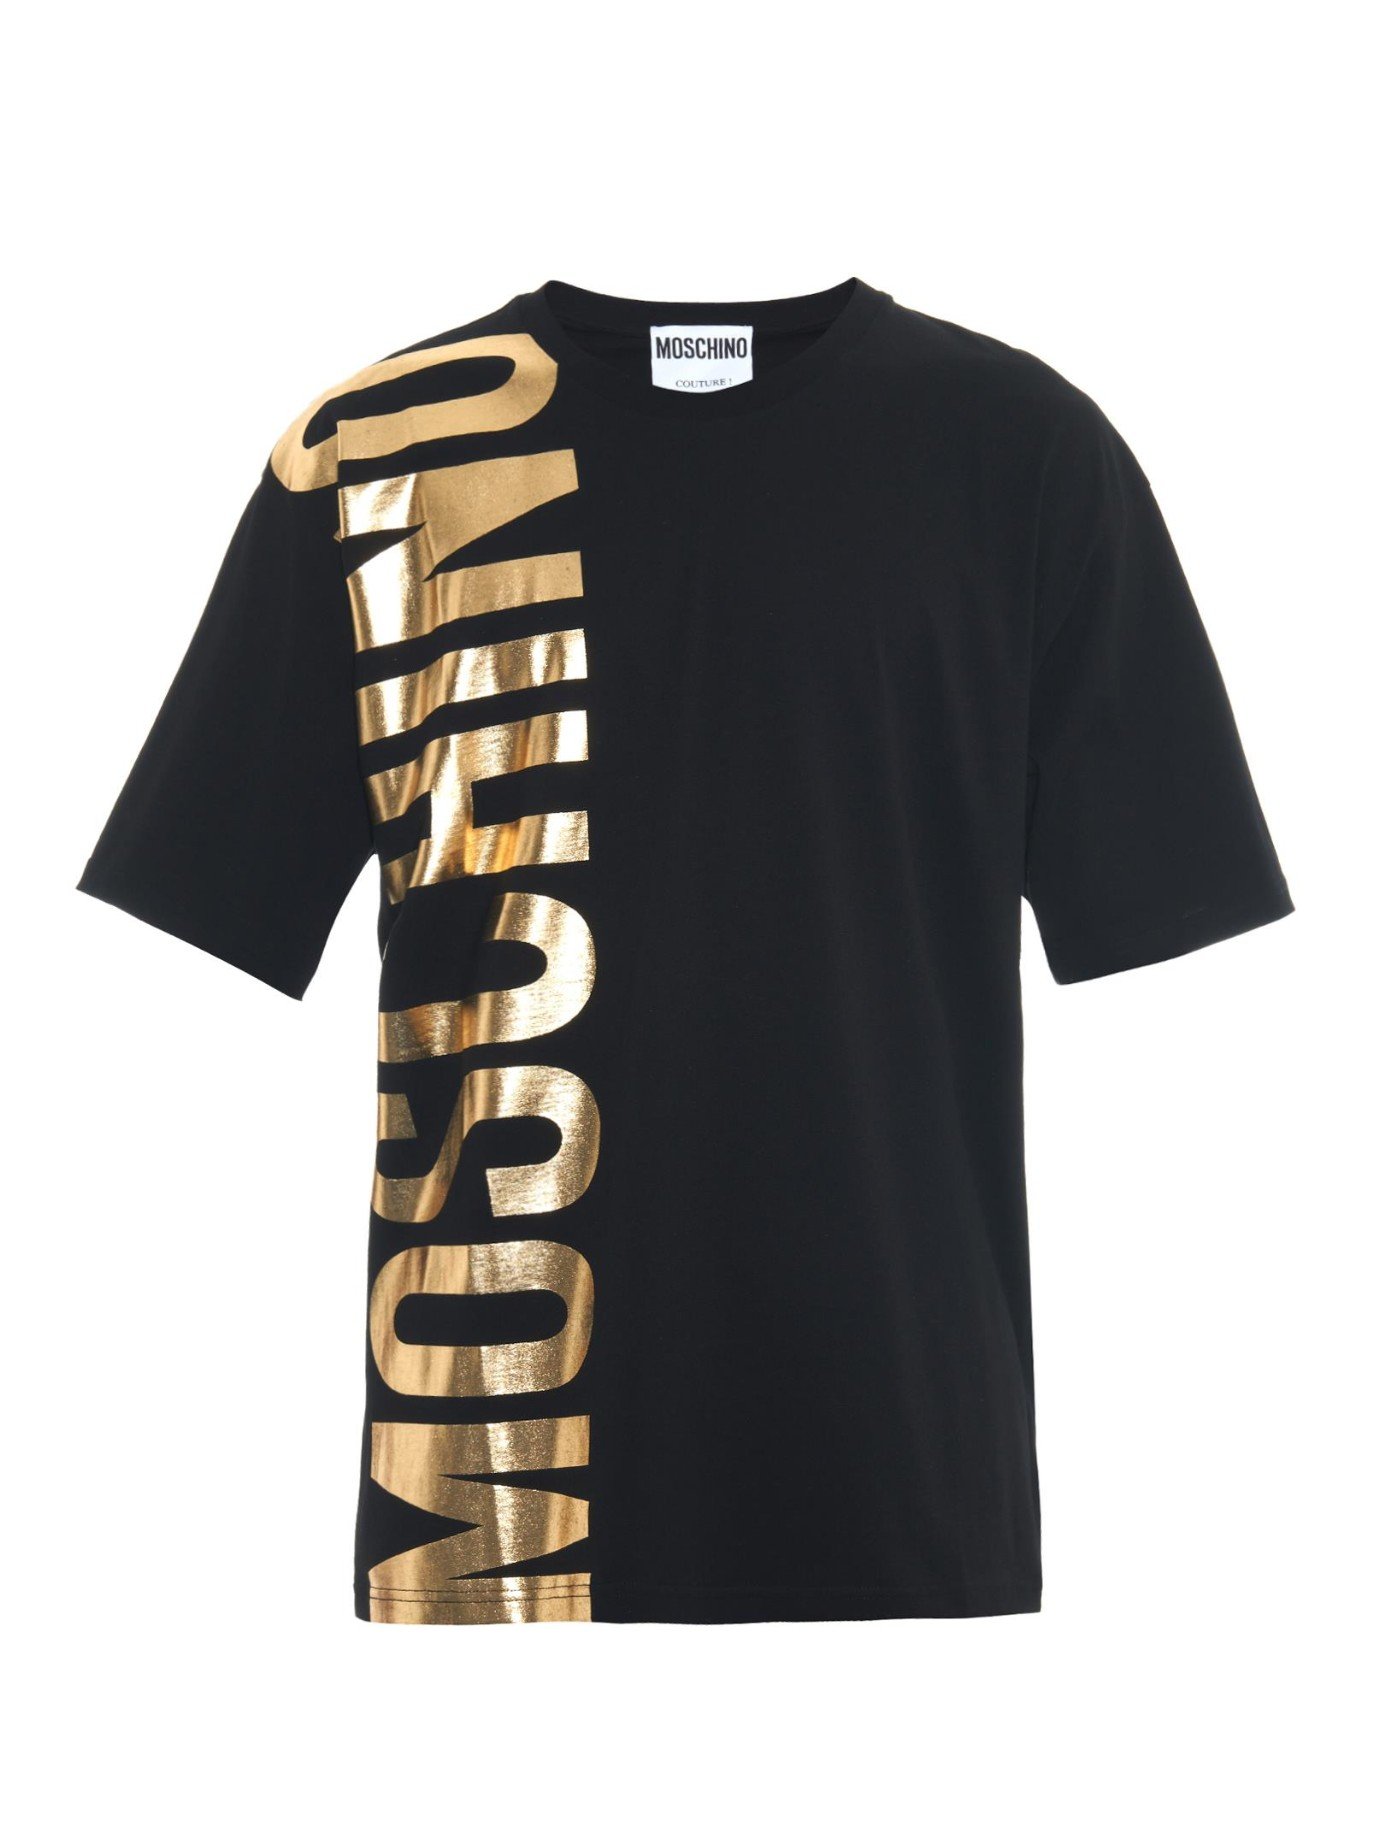 Moschino Printed-Logo Cotton T-Shirt in Black for Men - Lyst